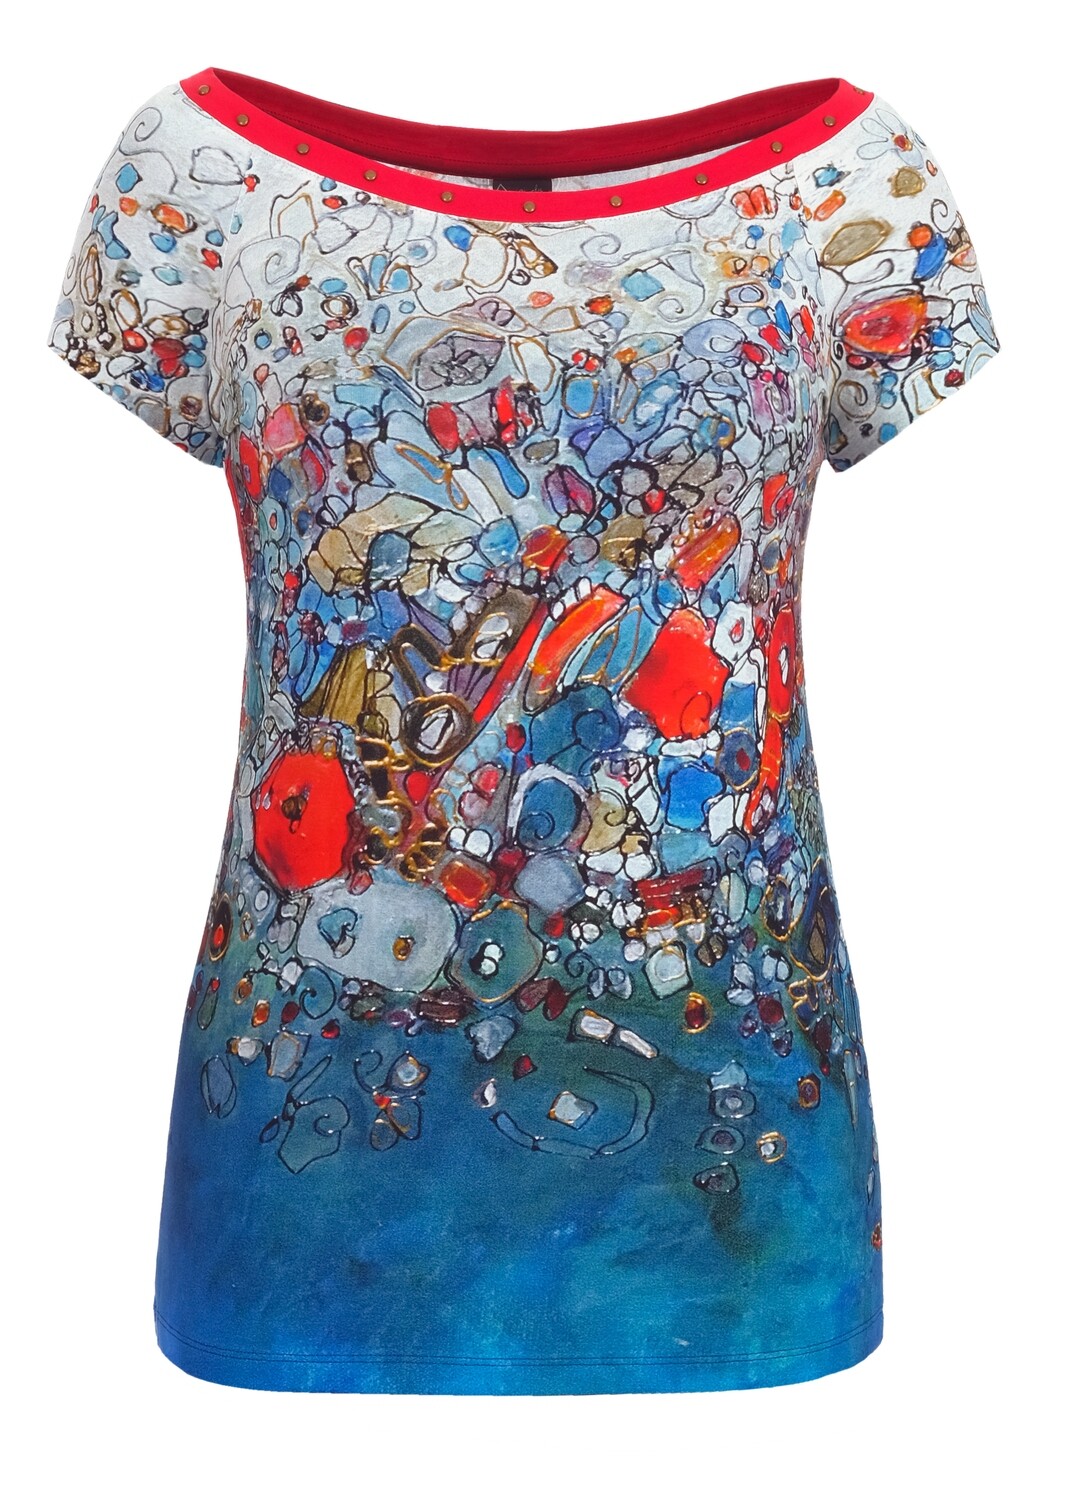 Simply Art Dolcezza: Stunning Red New Magma Abstract art Jeweled Neck Top SOLD OUT